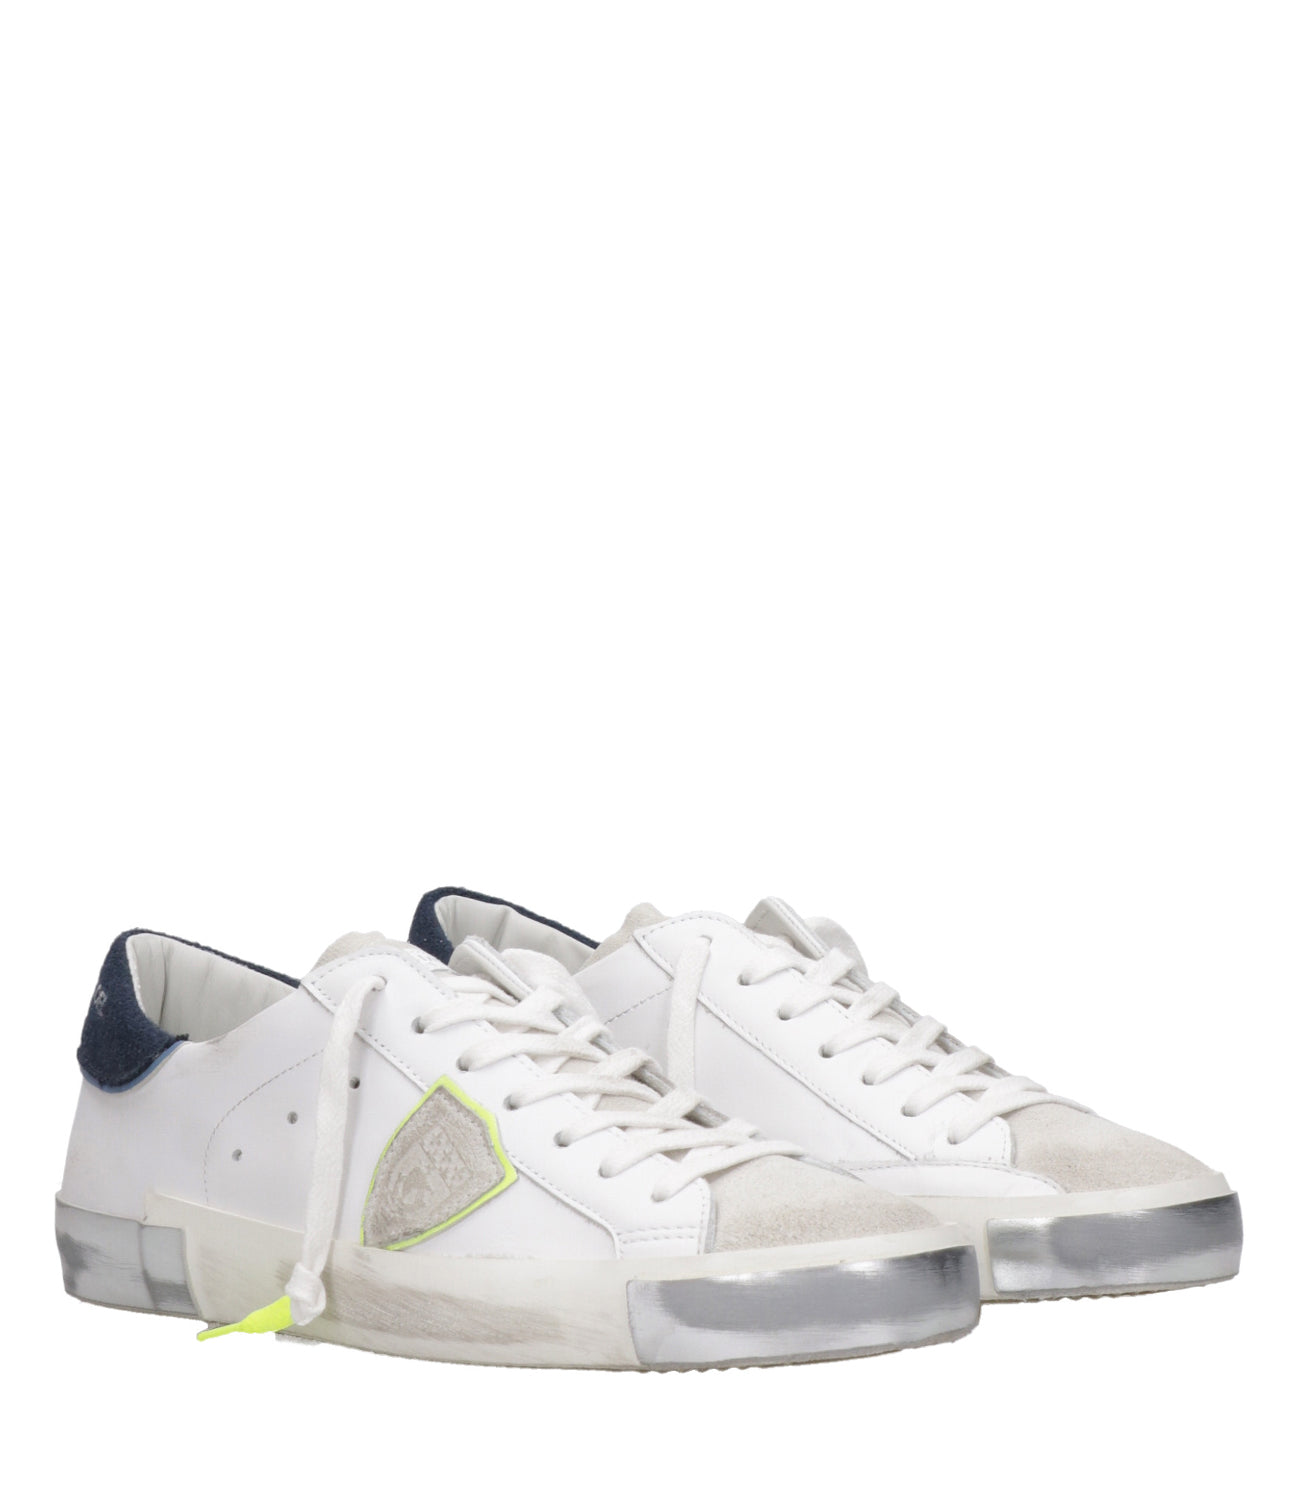 Philippe Model | PRSX Low White and Blue Sneakers